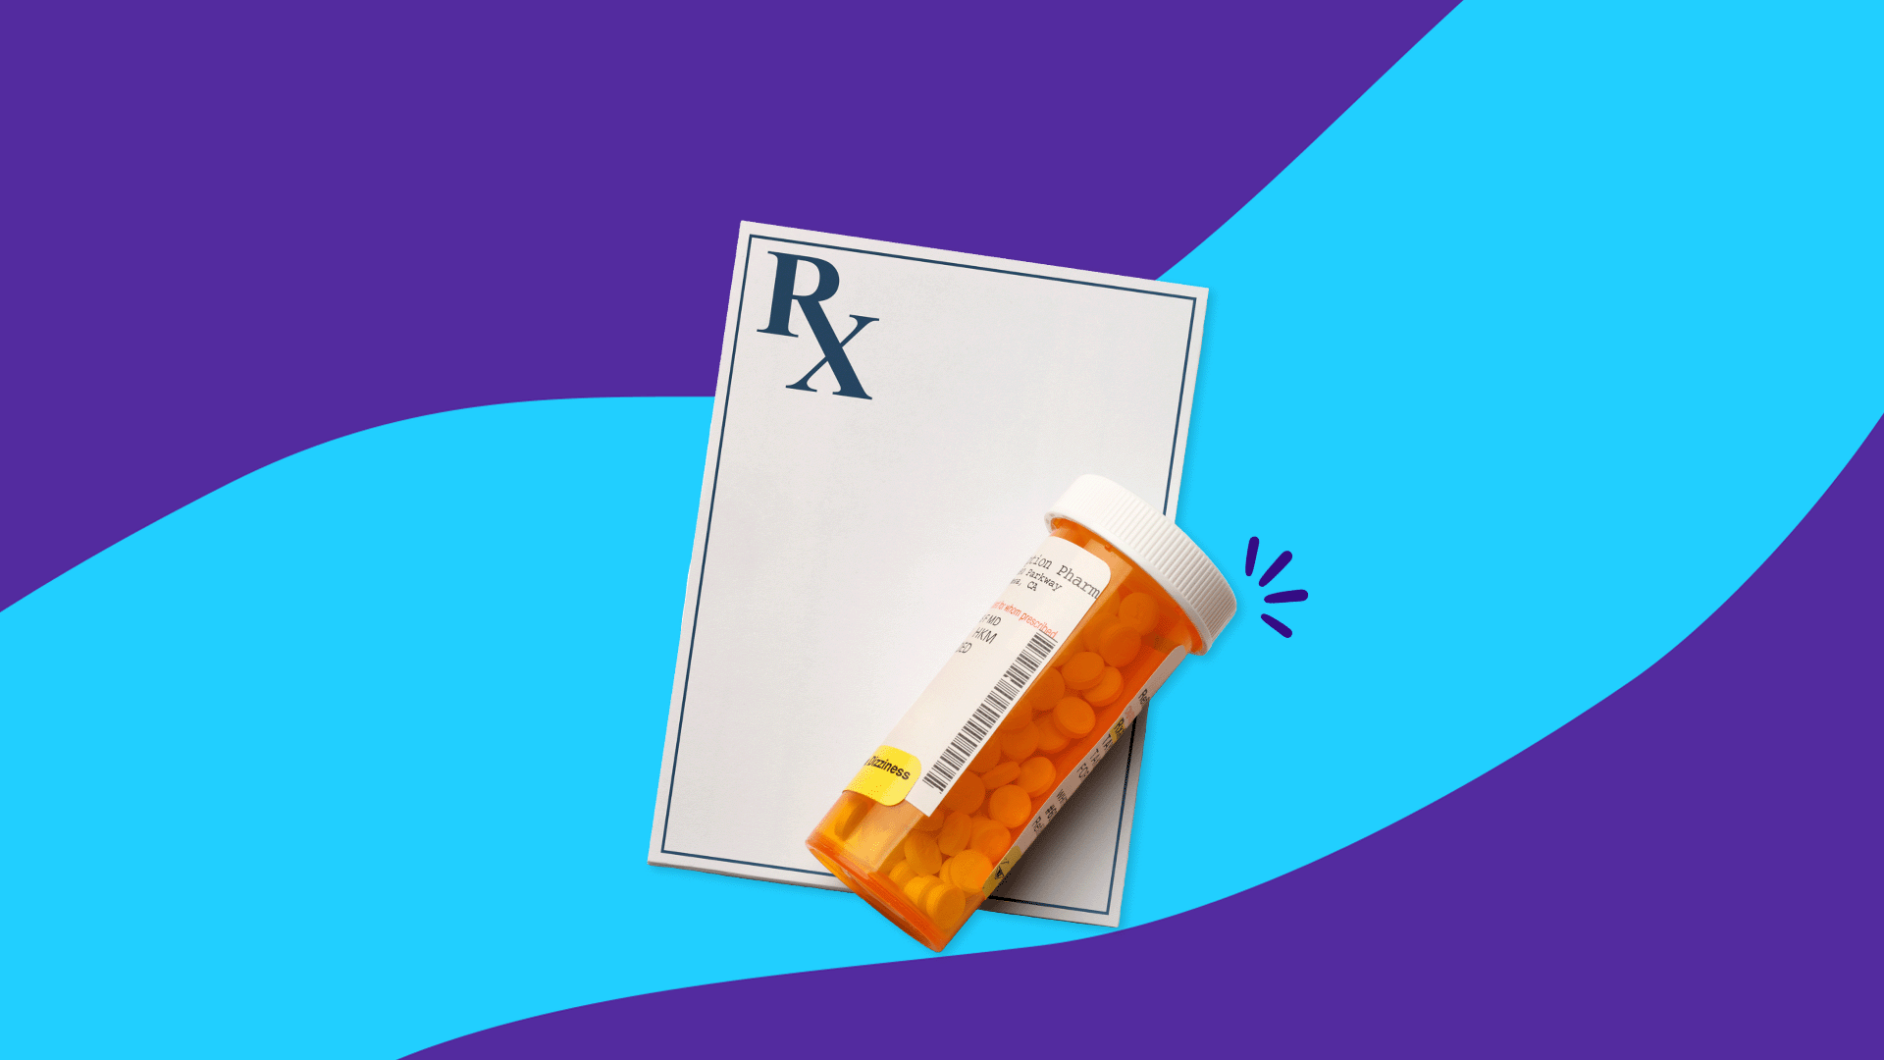 Rx prescription pad and Rx pill bottle: Metformin interactions